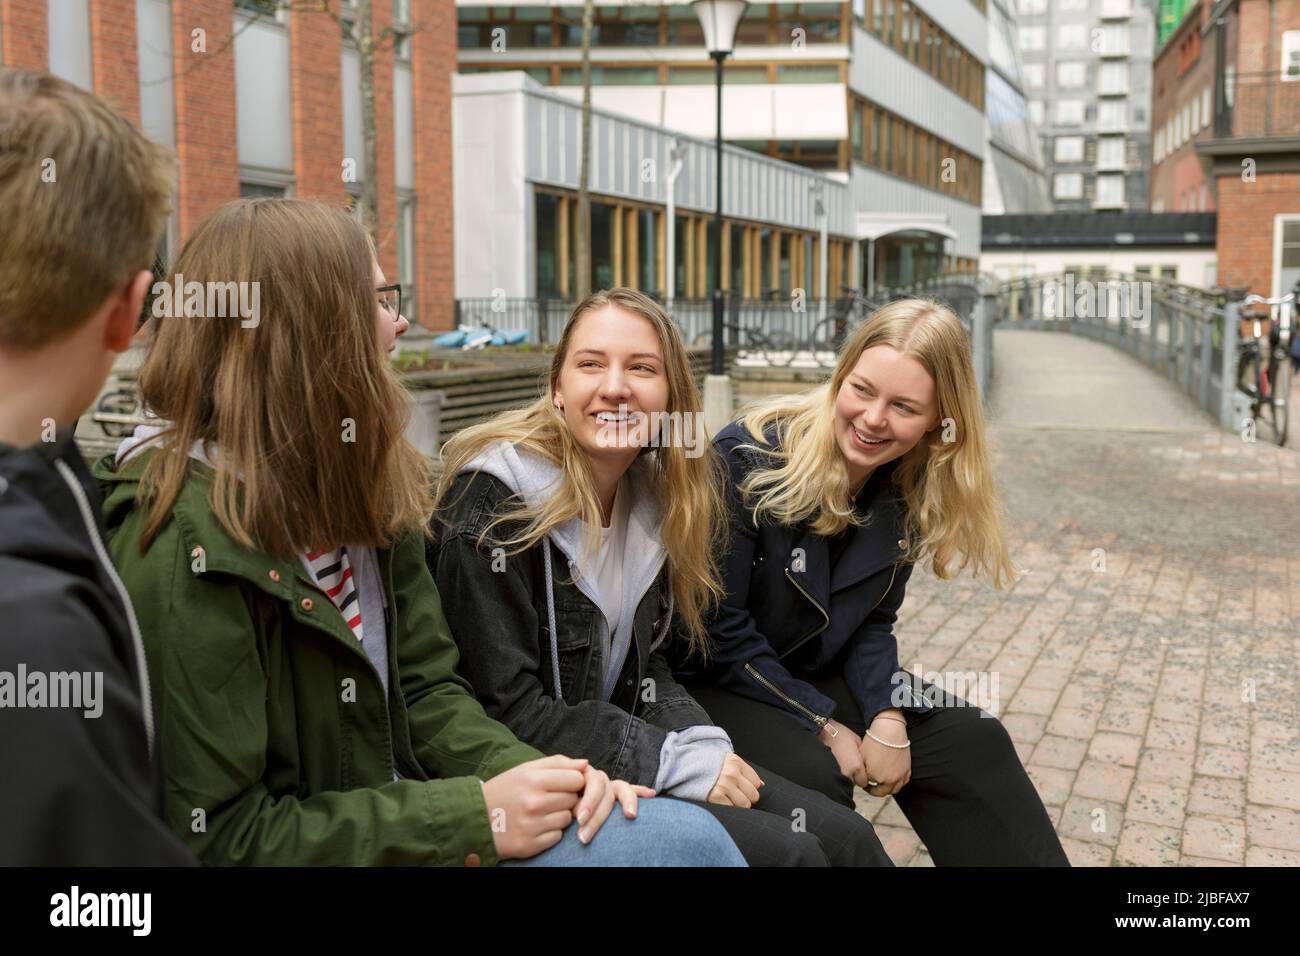 Friends sitting on bench in Stockholm, Sweden Stock Photo